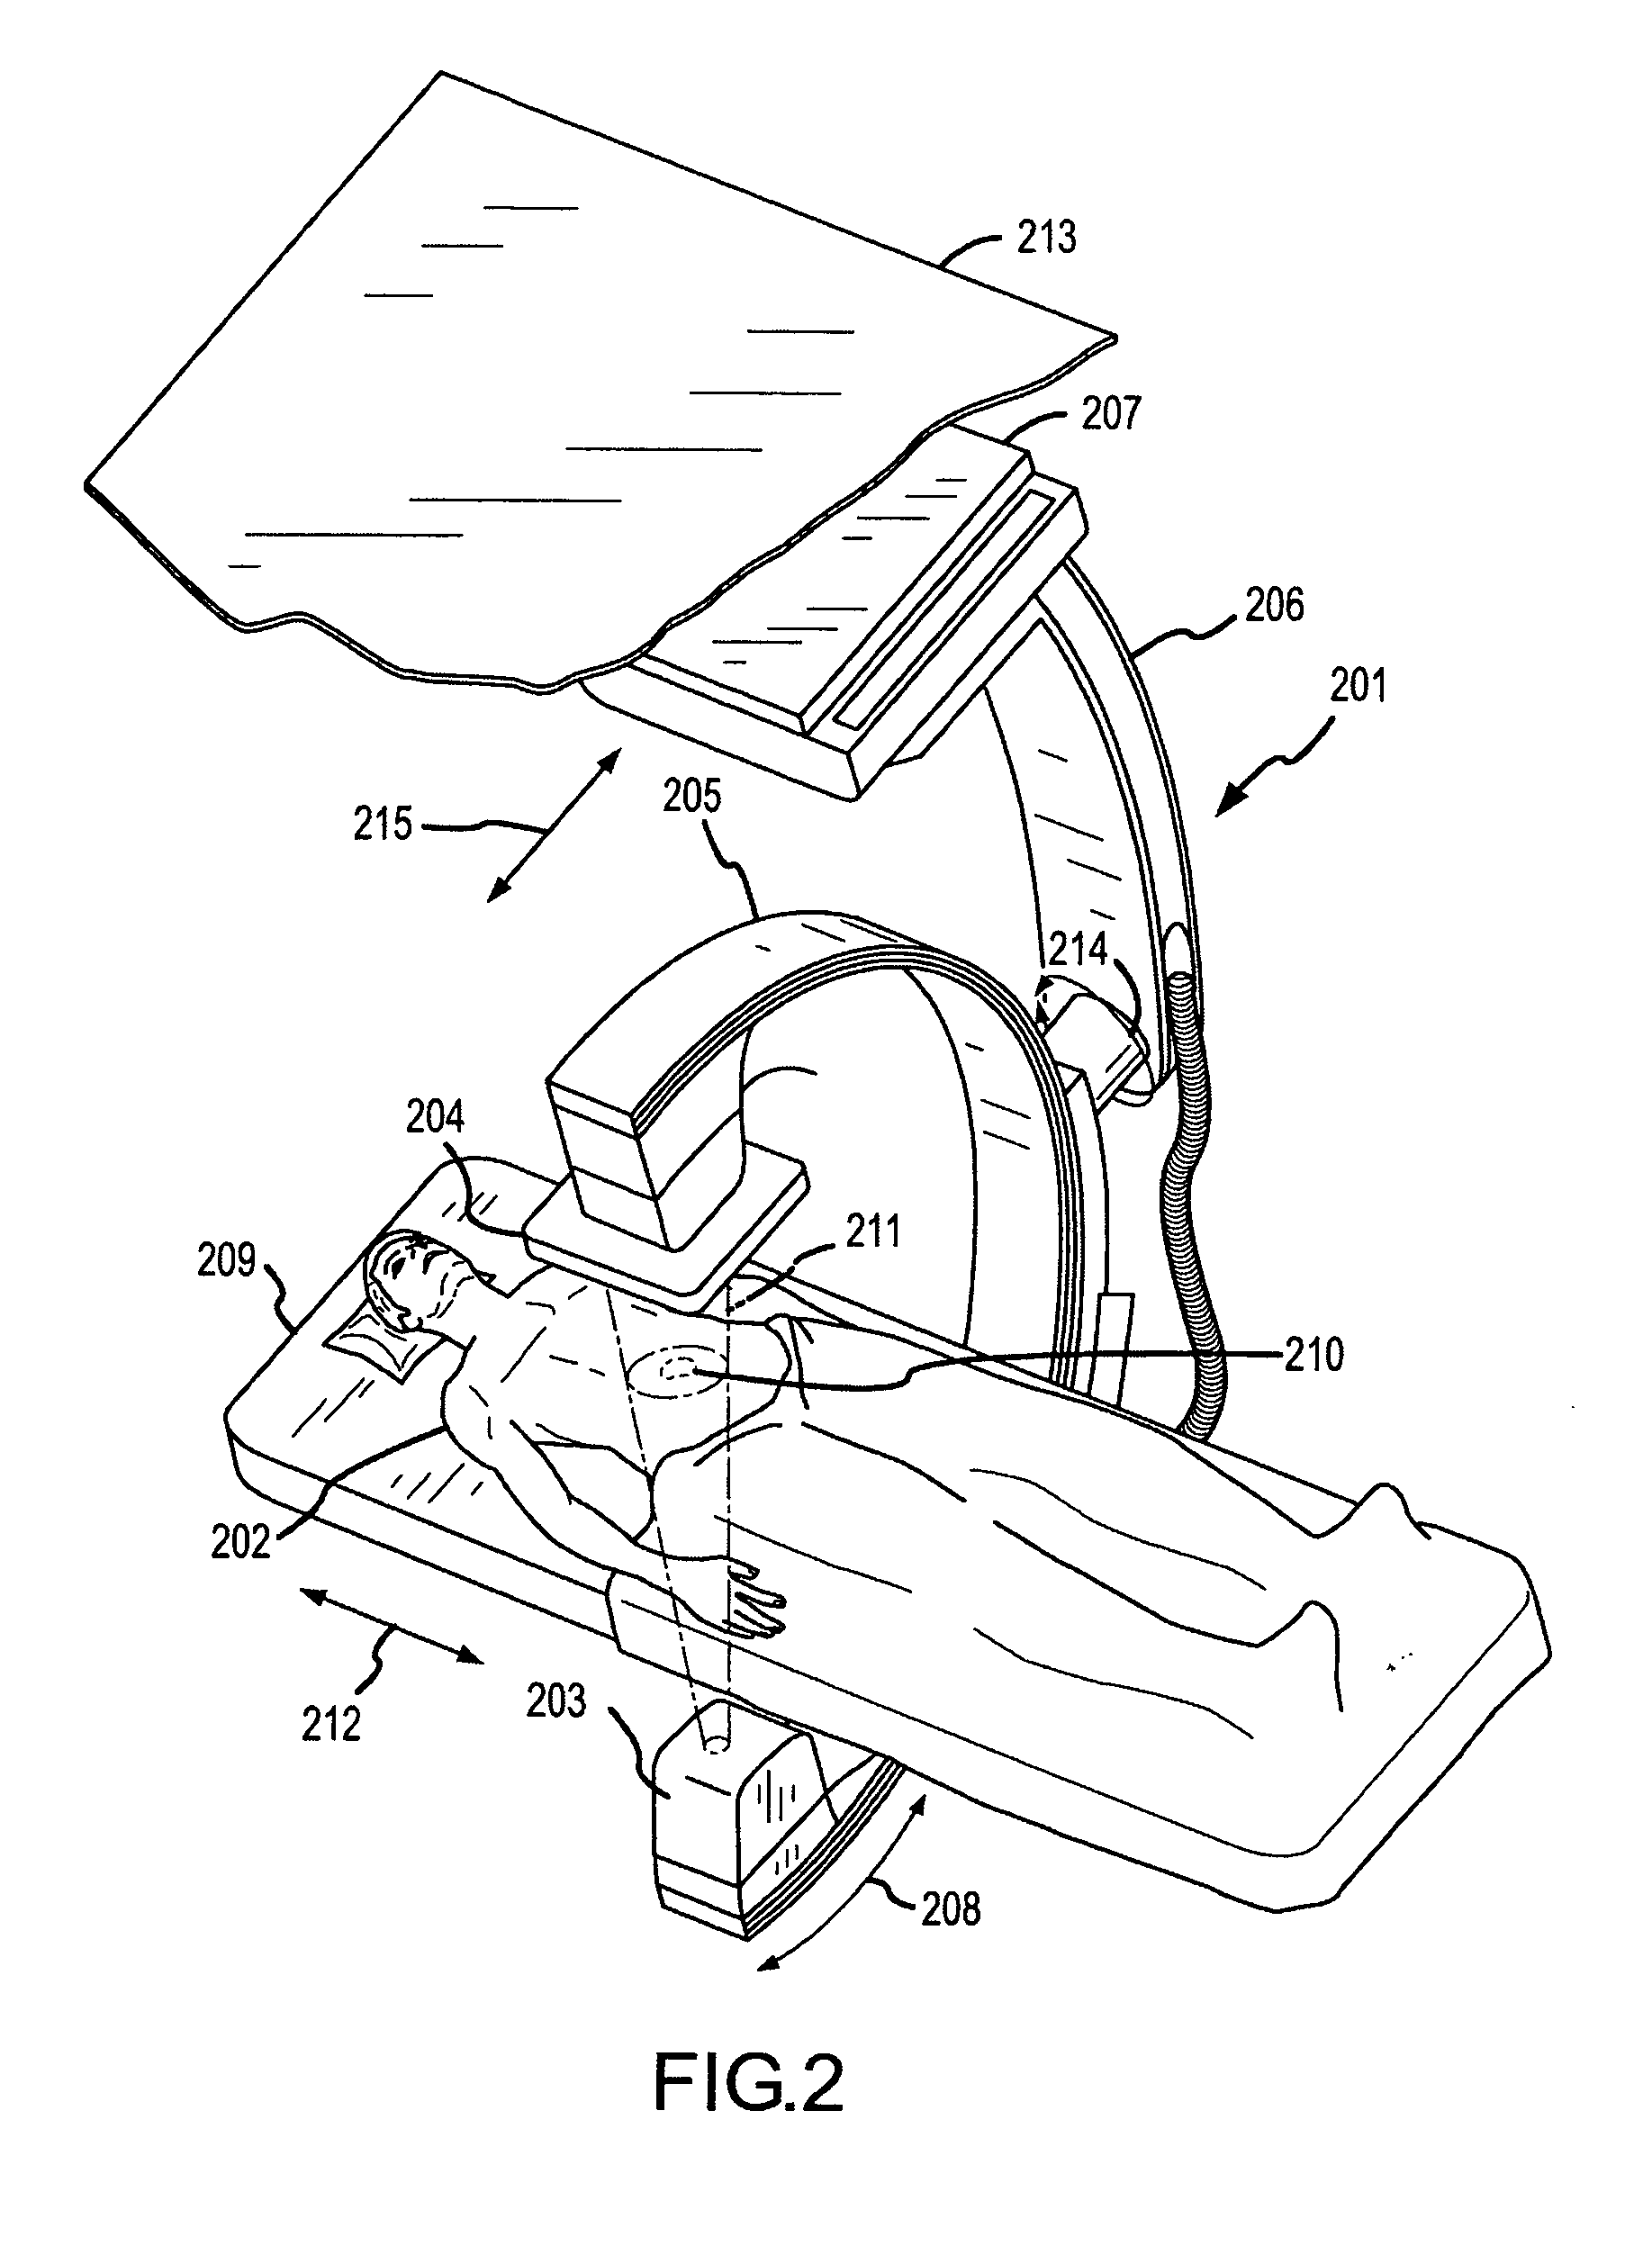 Apparatus for planning and performing thermal ablation